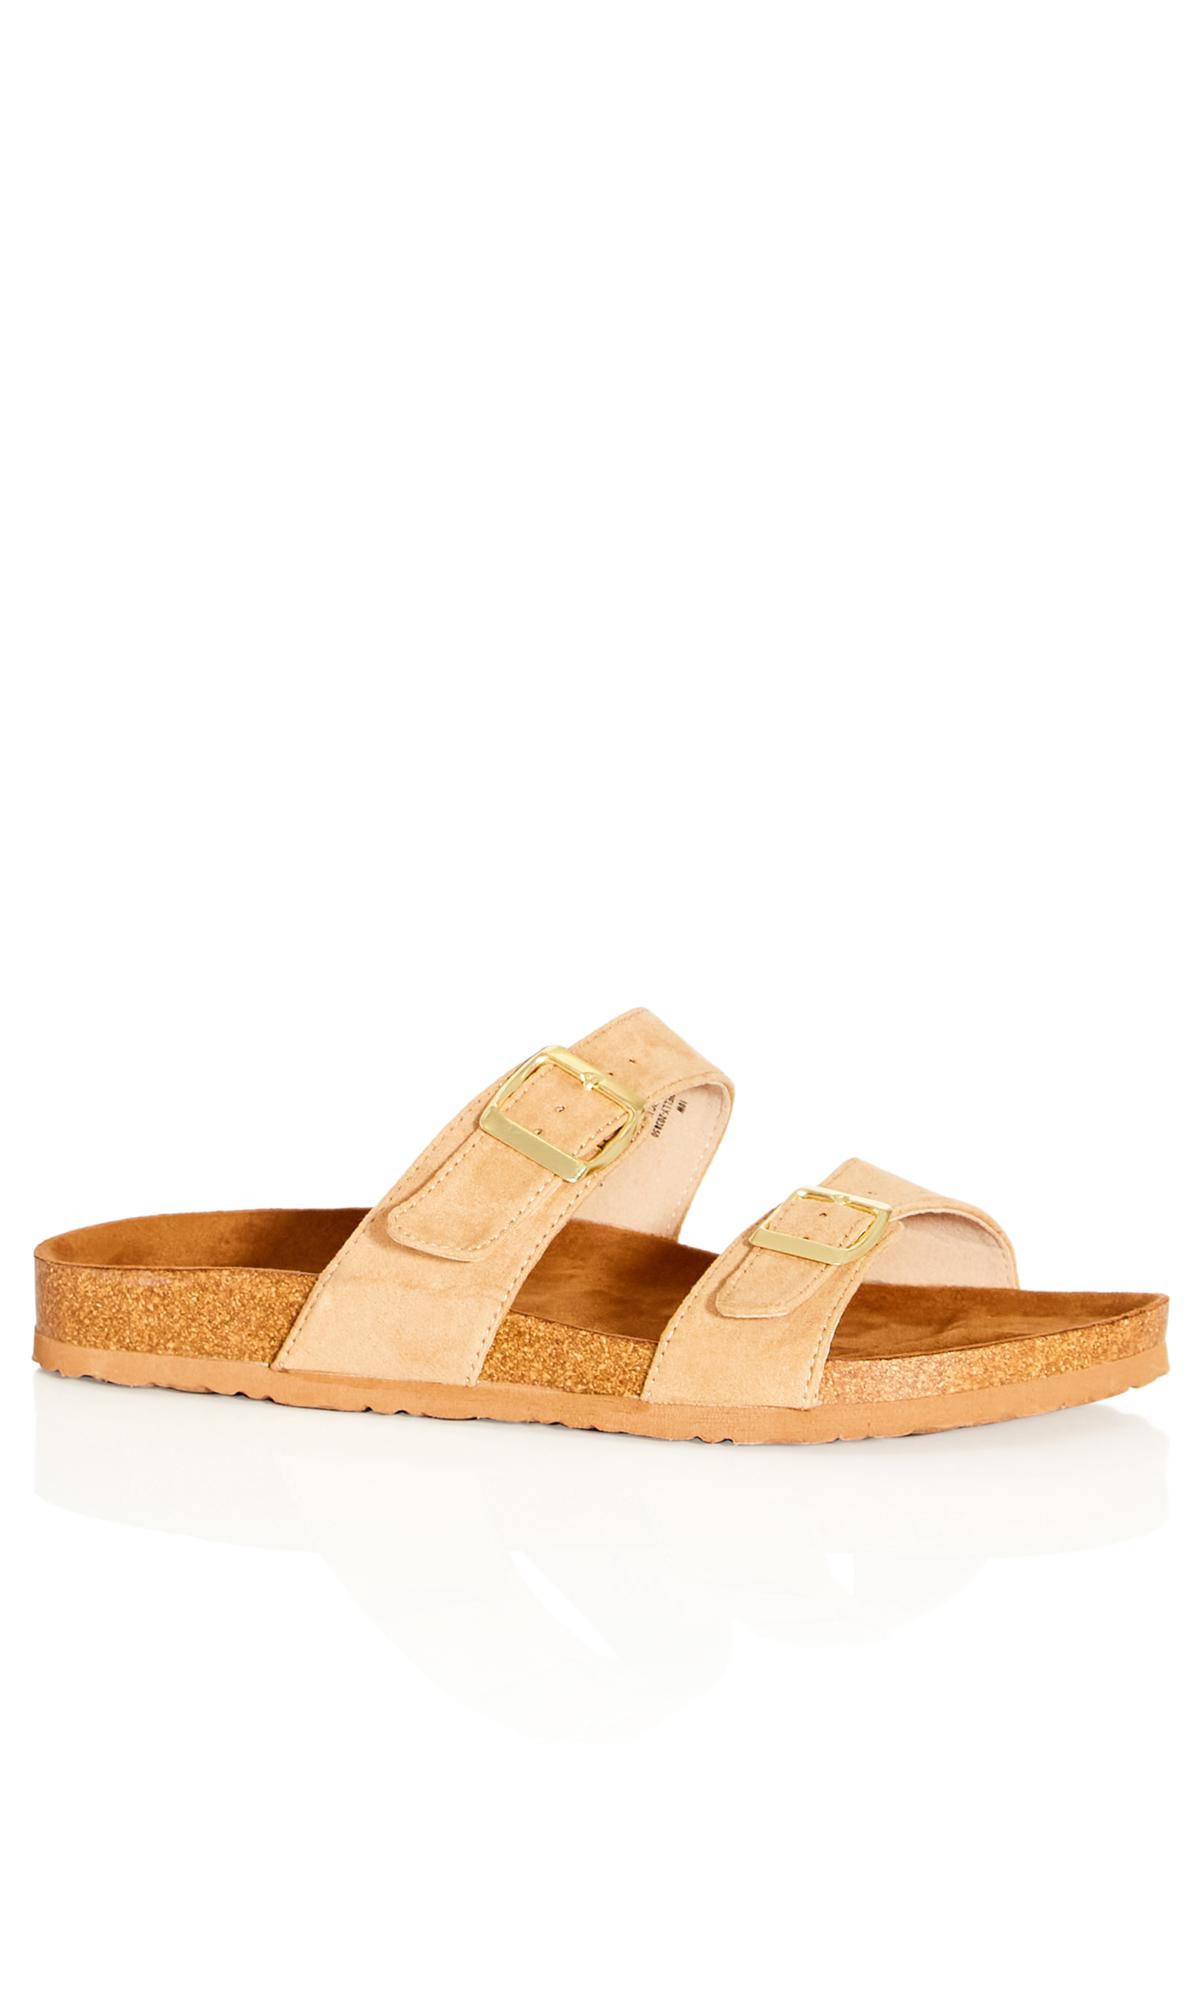 WIDE FIT Nelly Sandal - tan 1